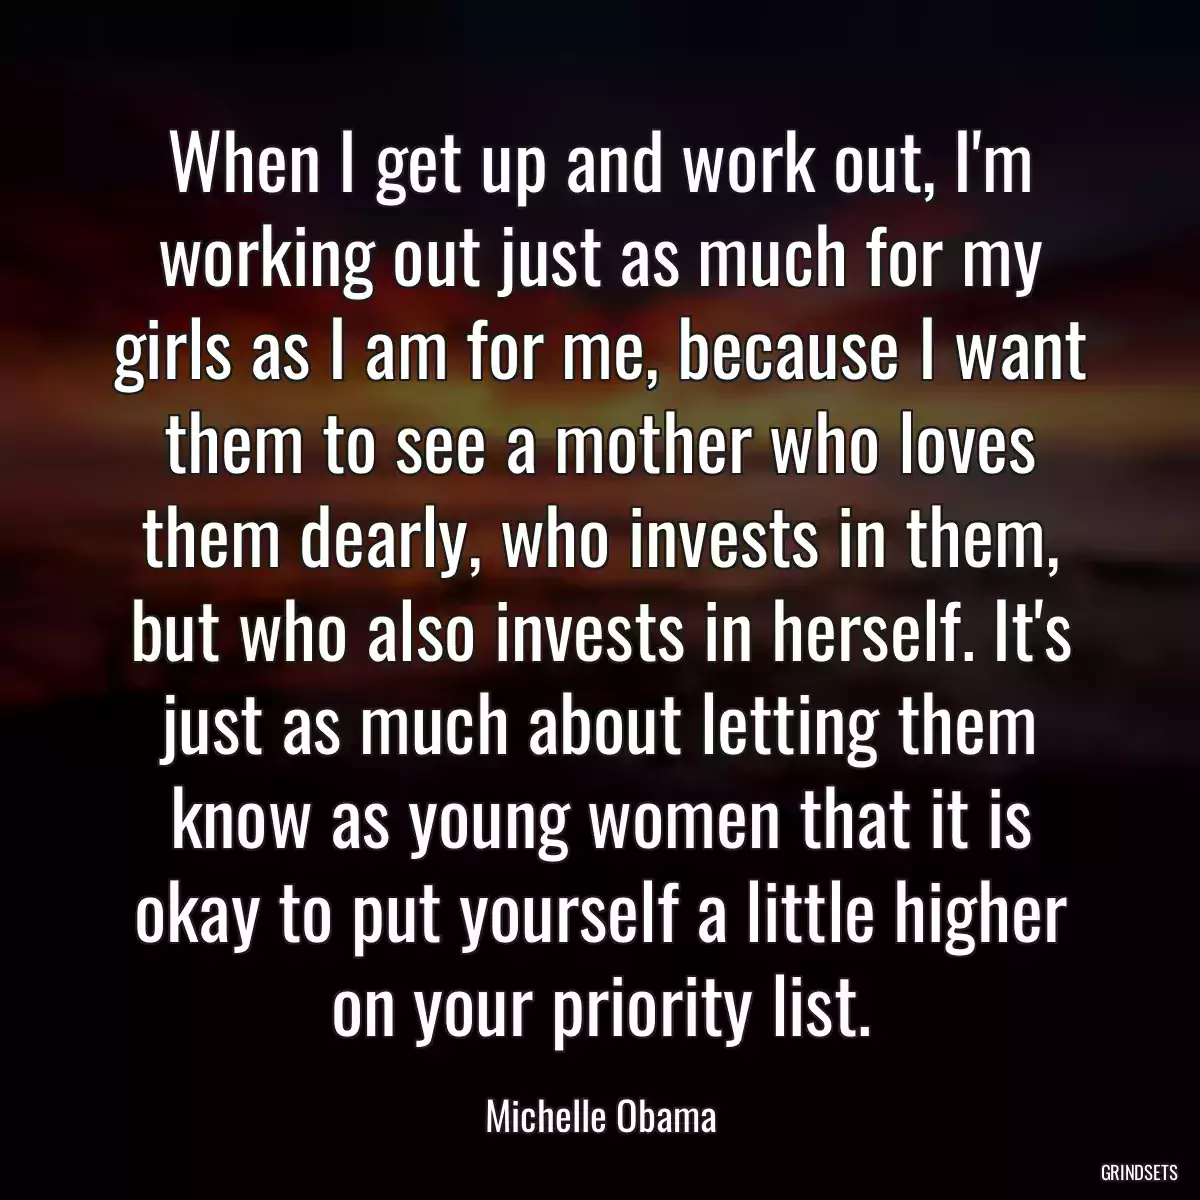 When I get up and work out, I\'m working out just as much for my girls as I am for me, because I want them to see a mother who loves them dearly, who invests in them, but who also invests in herself. It\'s just as much about letting them know as young women that it is okay to put yourself a little higher on your priority list.